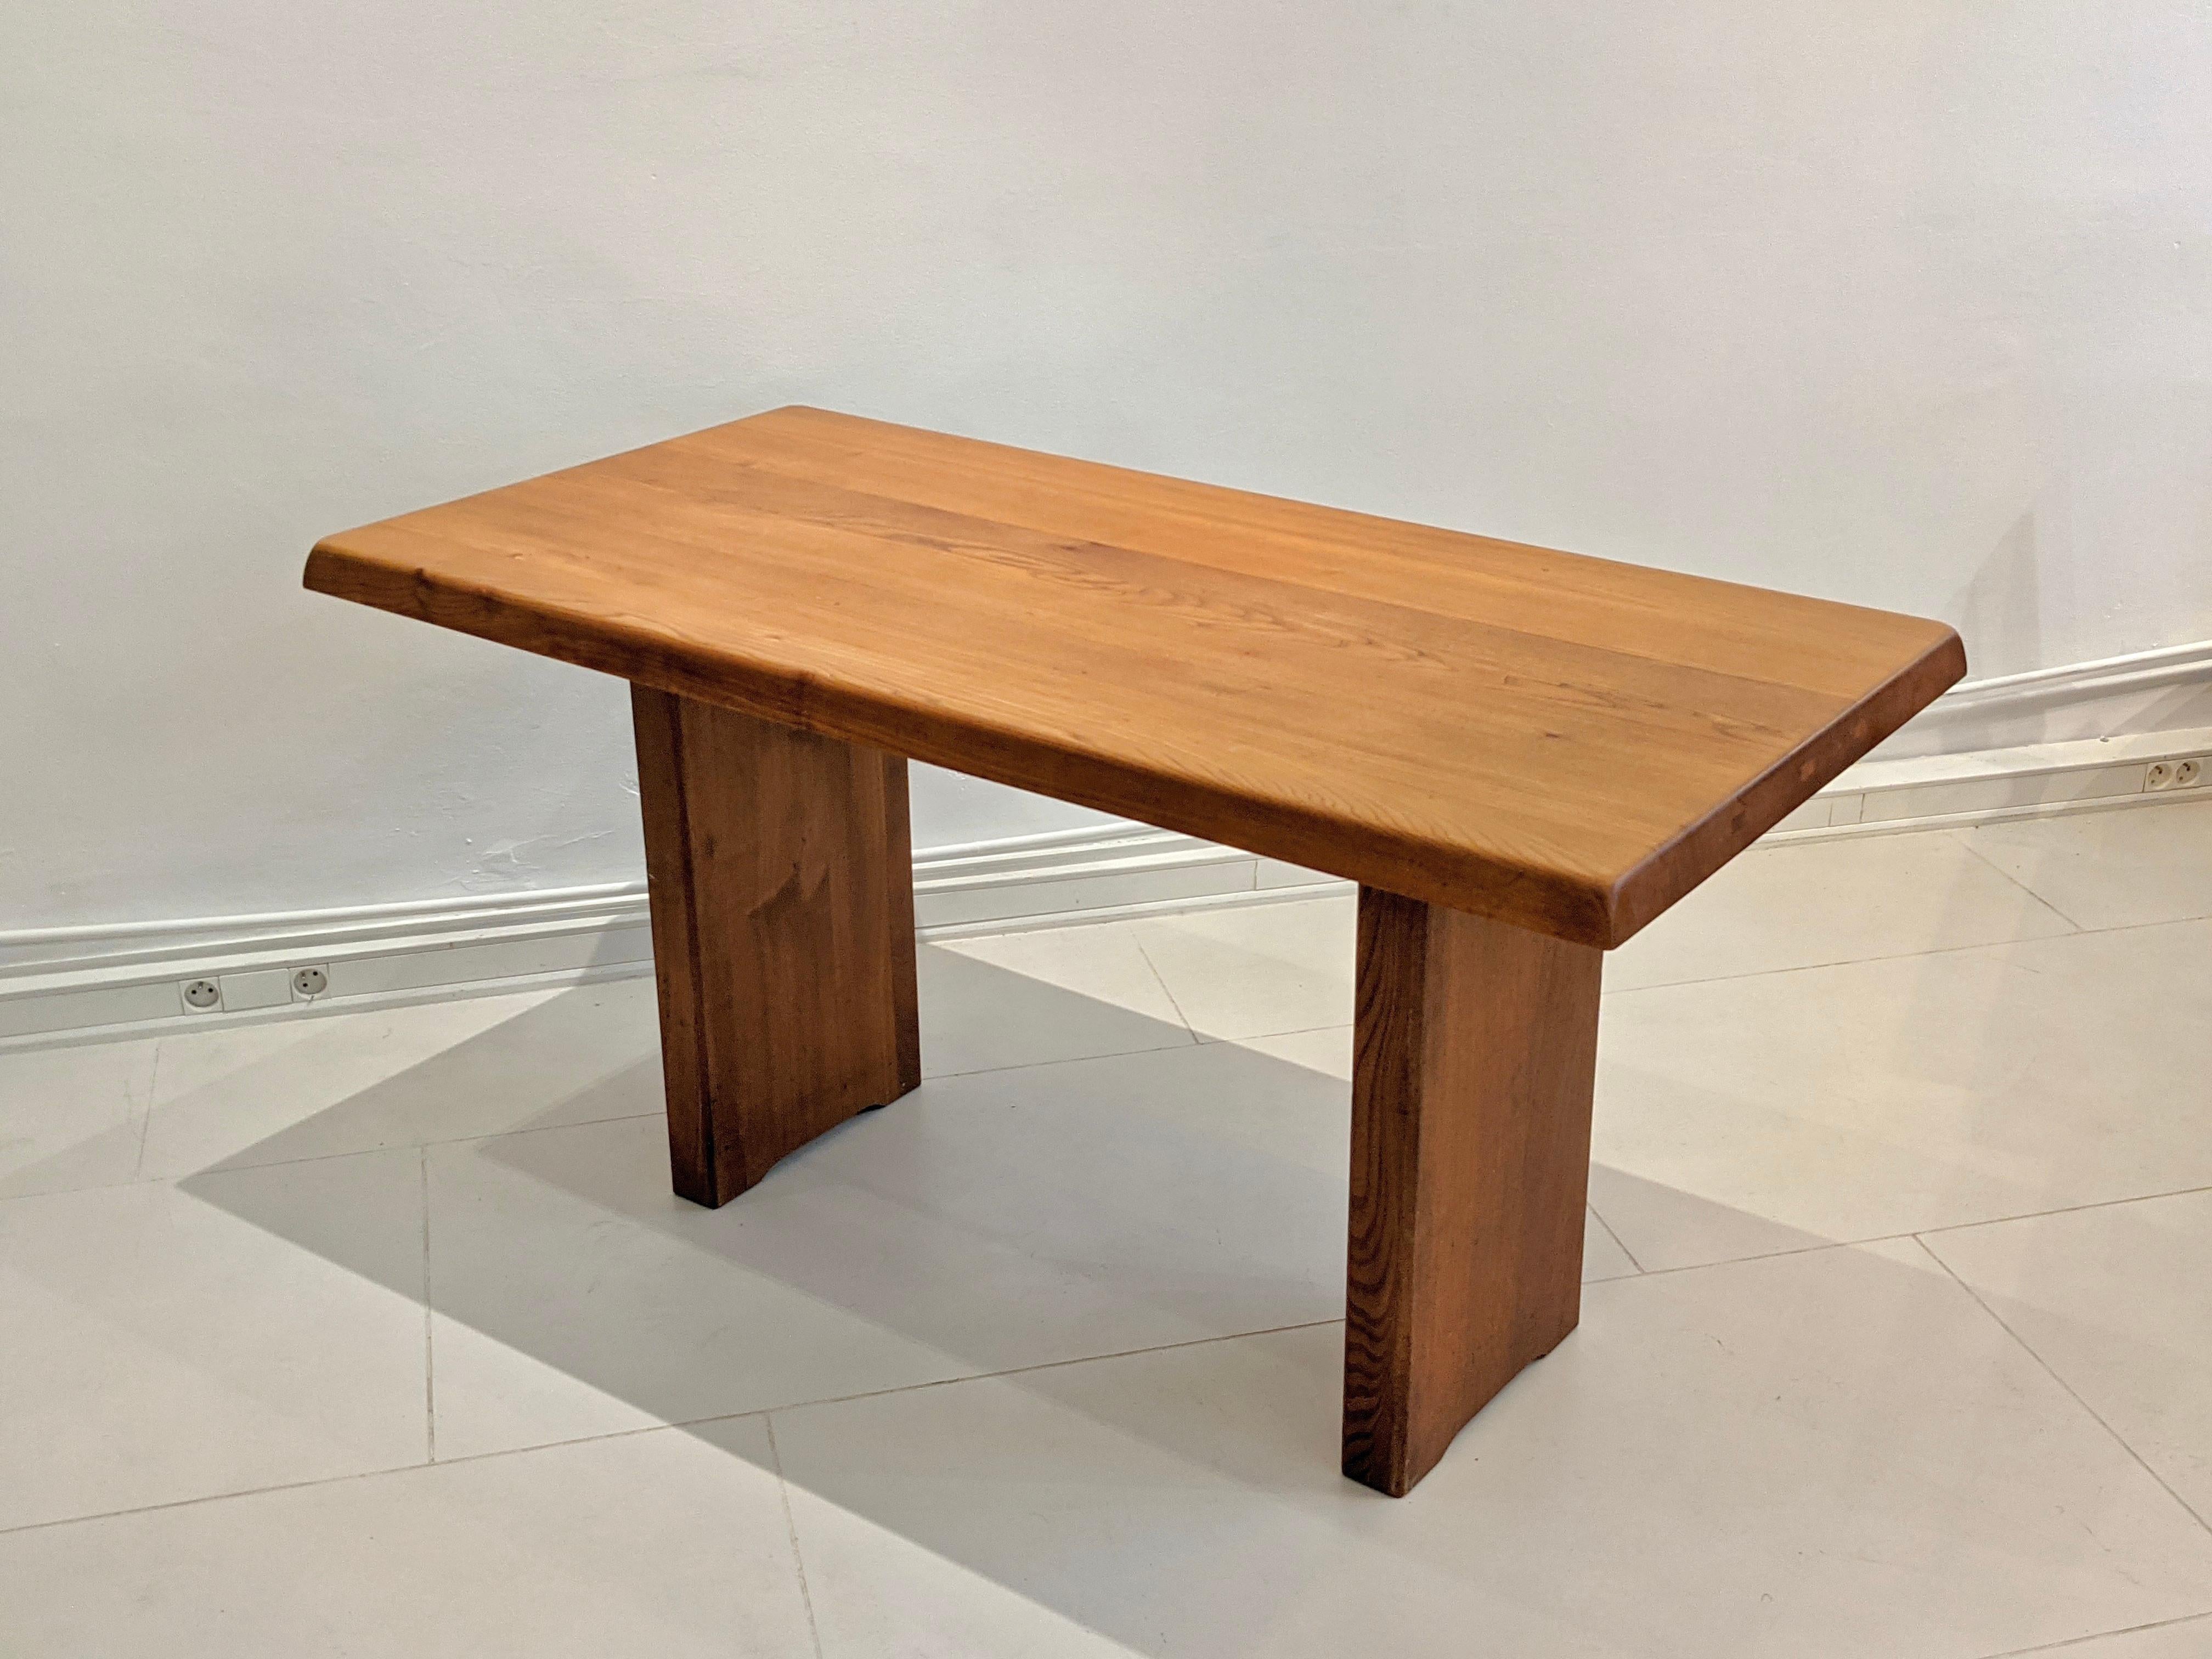 T14 elm table by Pierre Chapo. Very good condition.